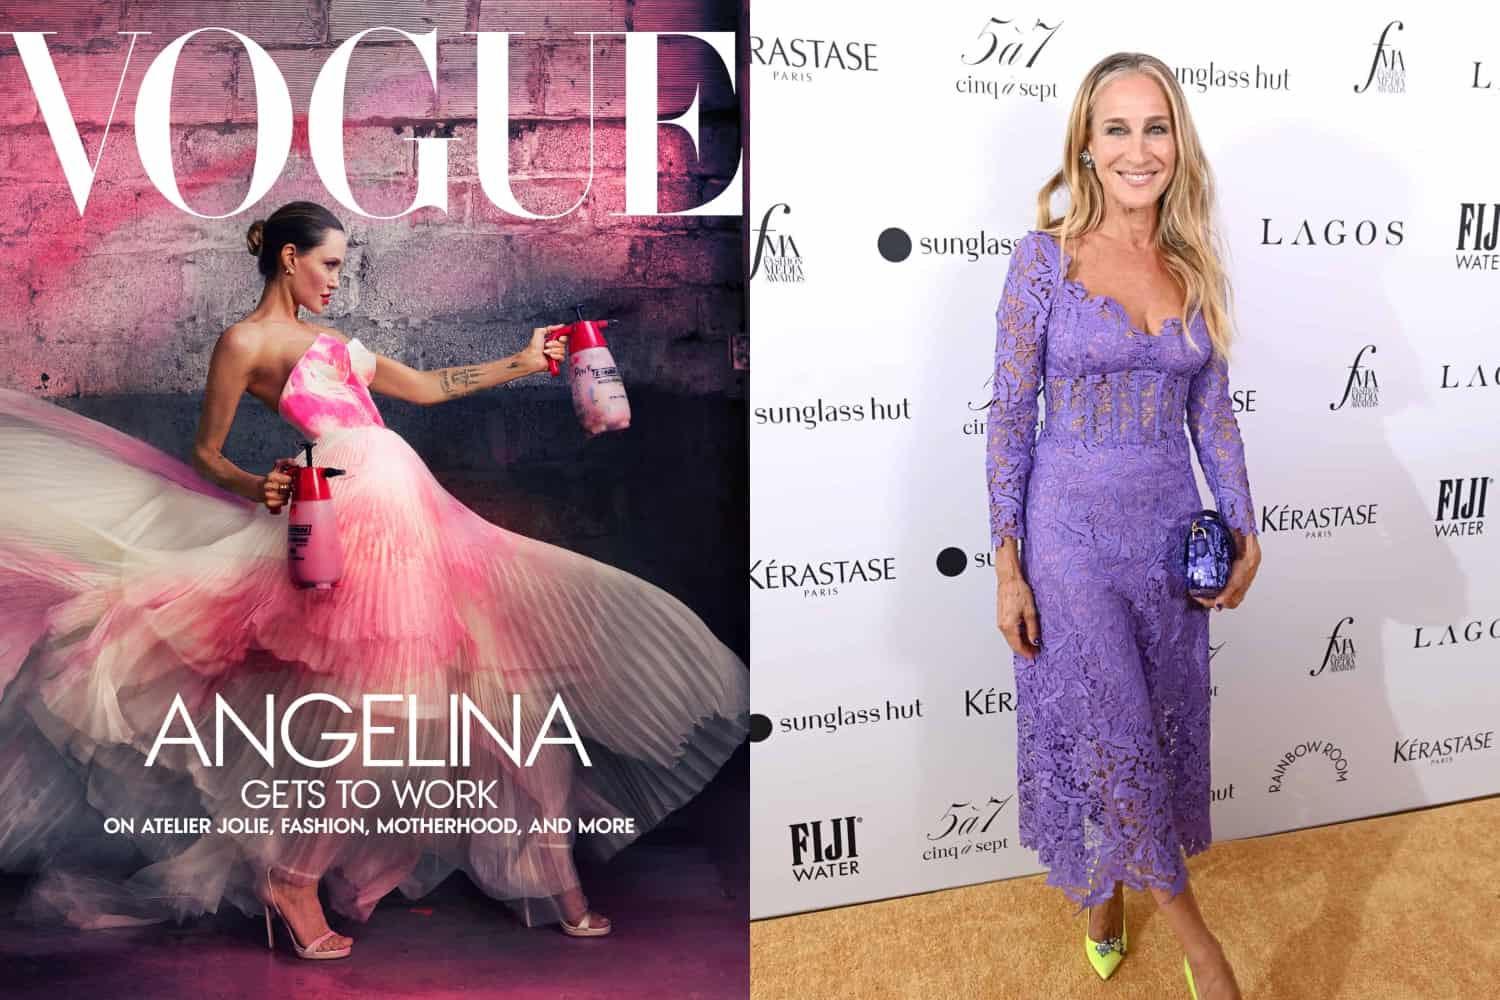 Angelina Jolie’s Vogue Cover, SJP To Host The CFDA Fashion Awards, An Honor For Mr. Valentino, Dior’s Big Bash, And More!